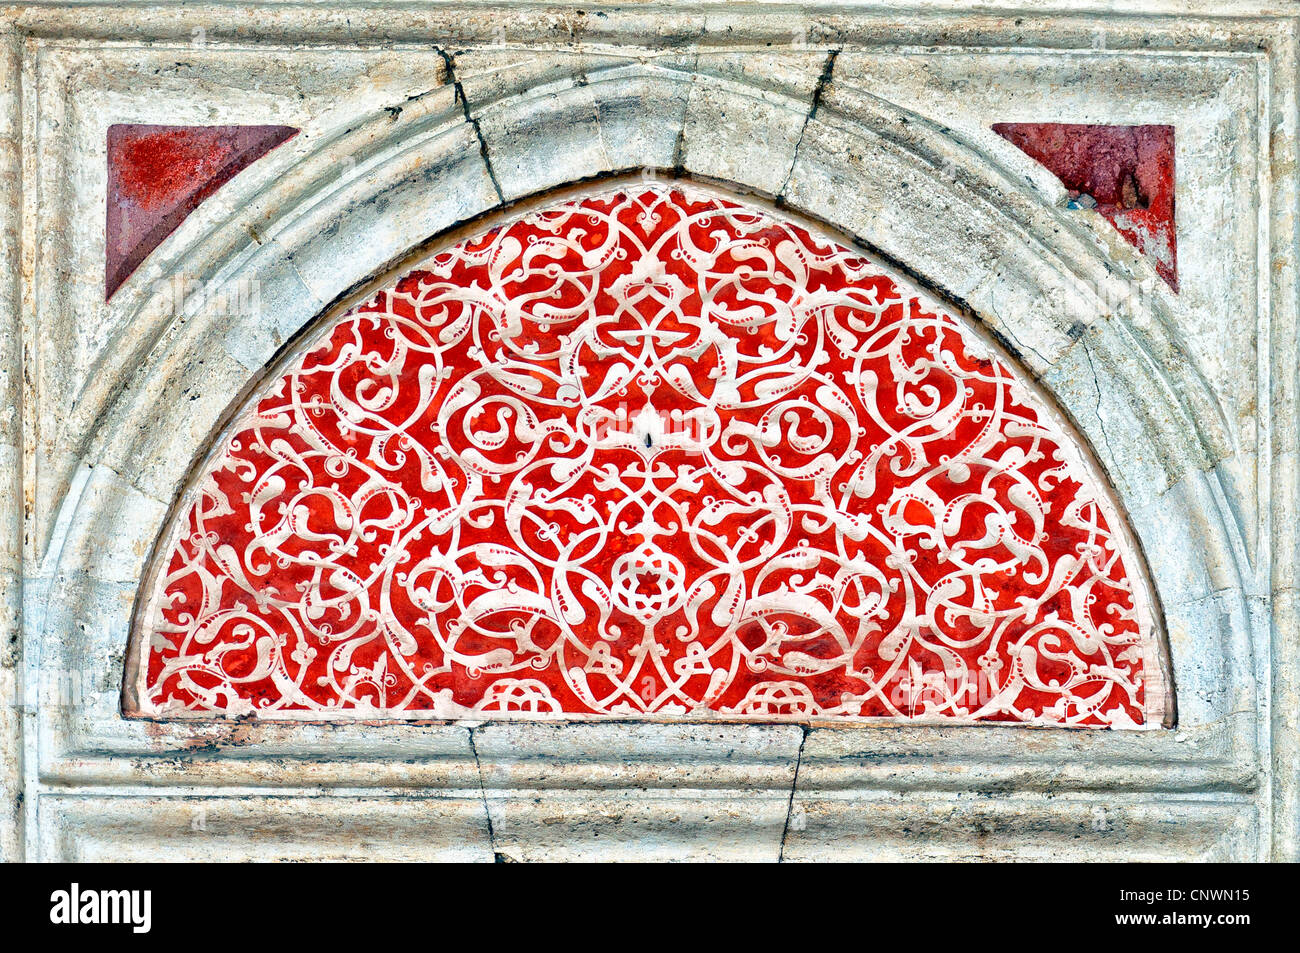 Islamic art from the Sehzade mosque in the turkish city of Istanbul. Stock Photo